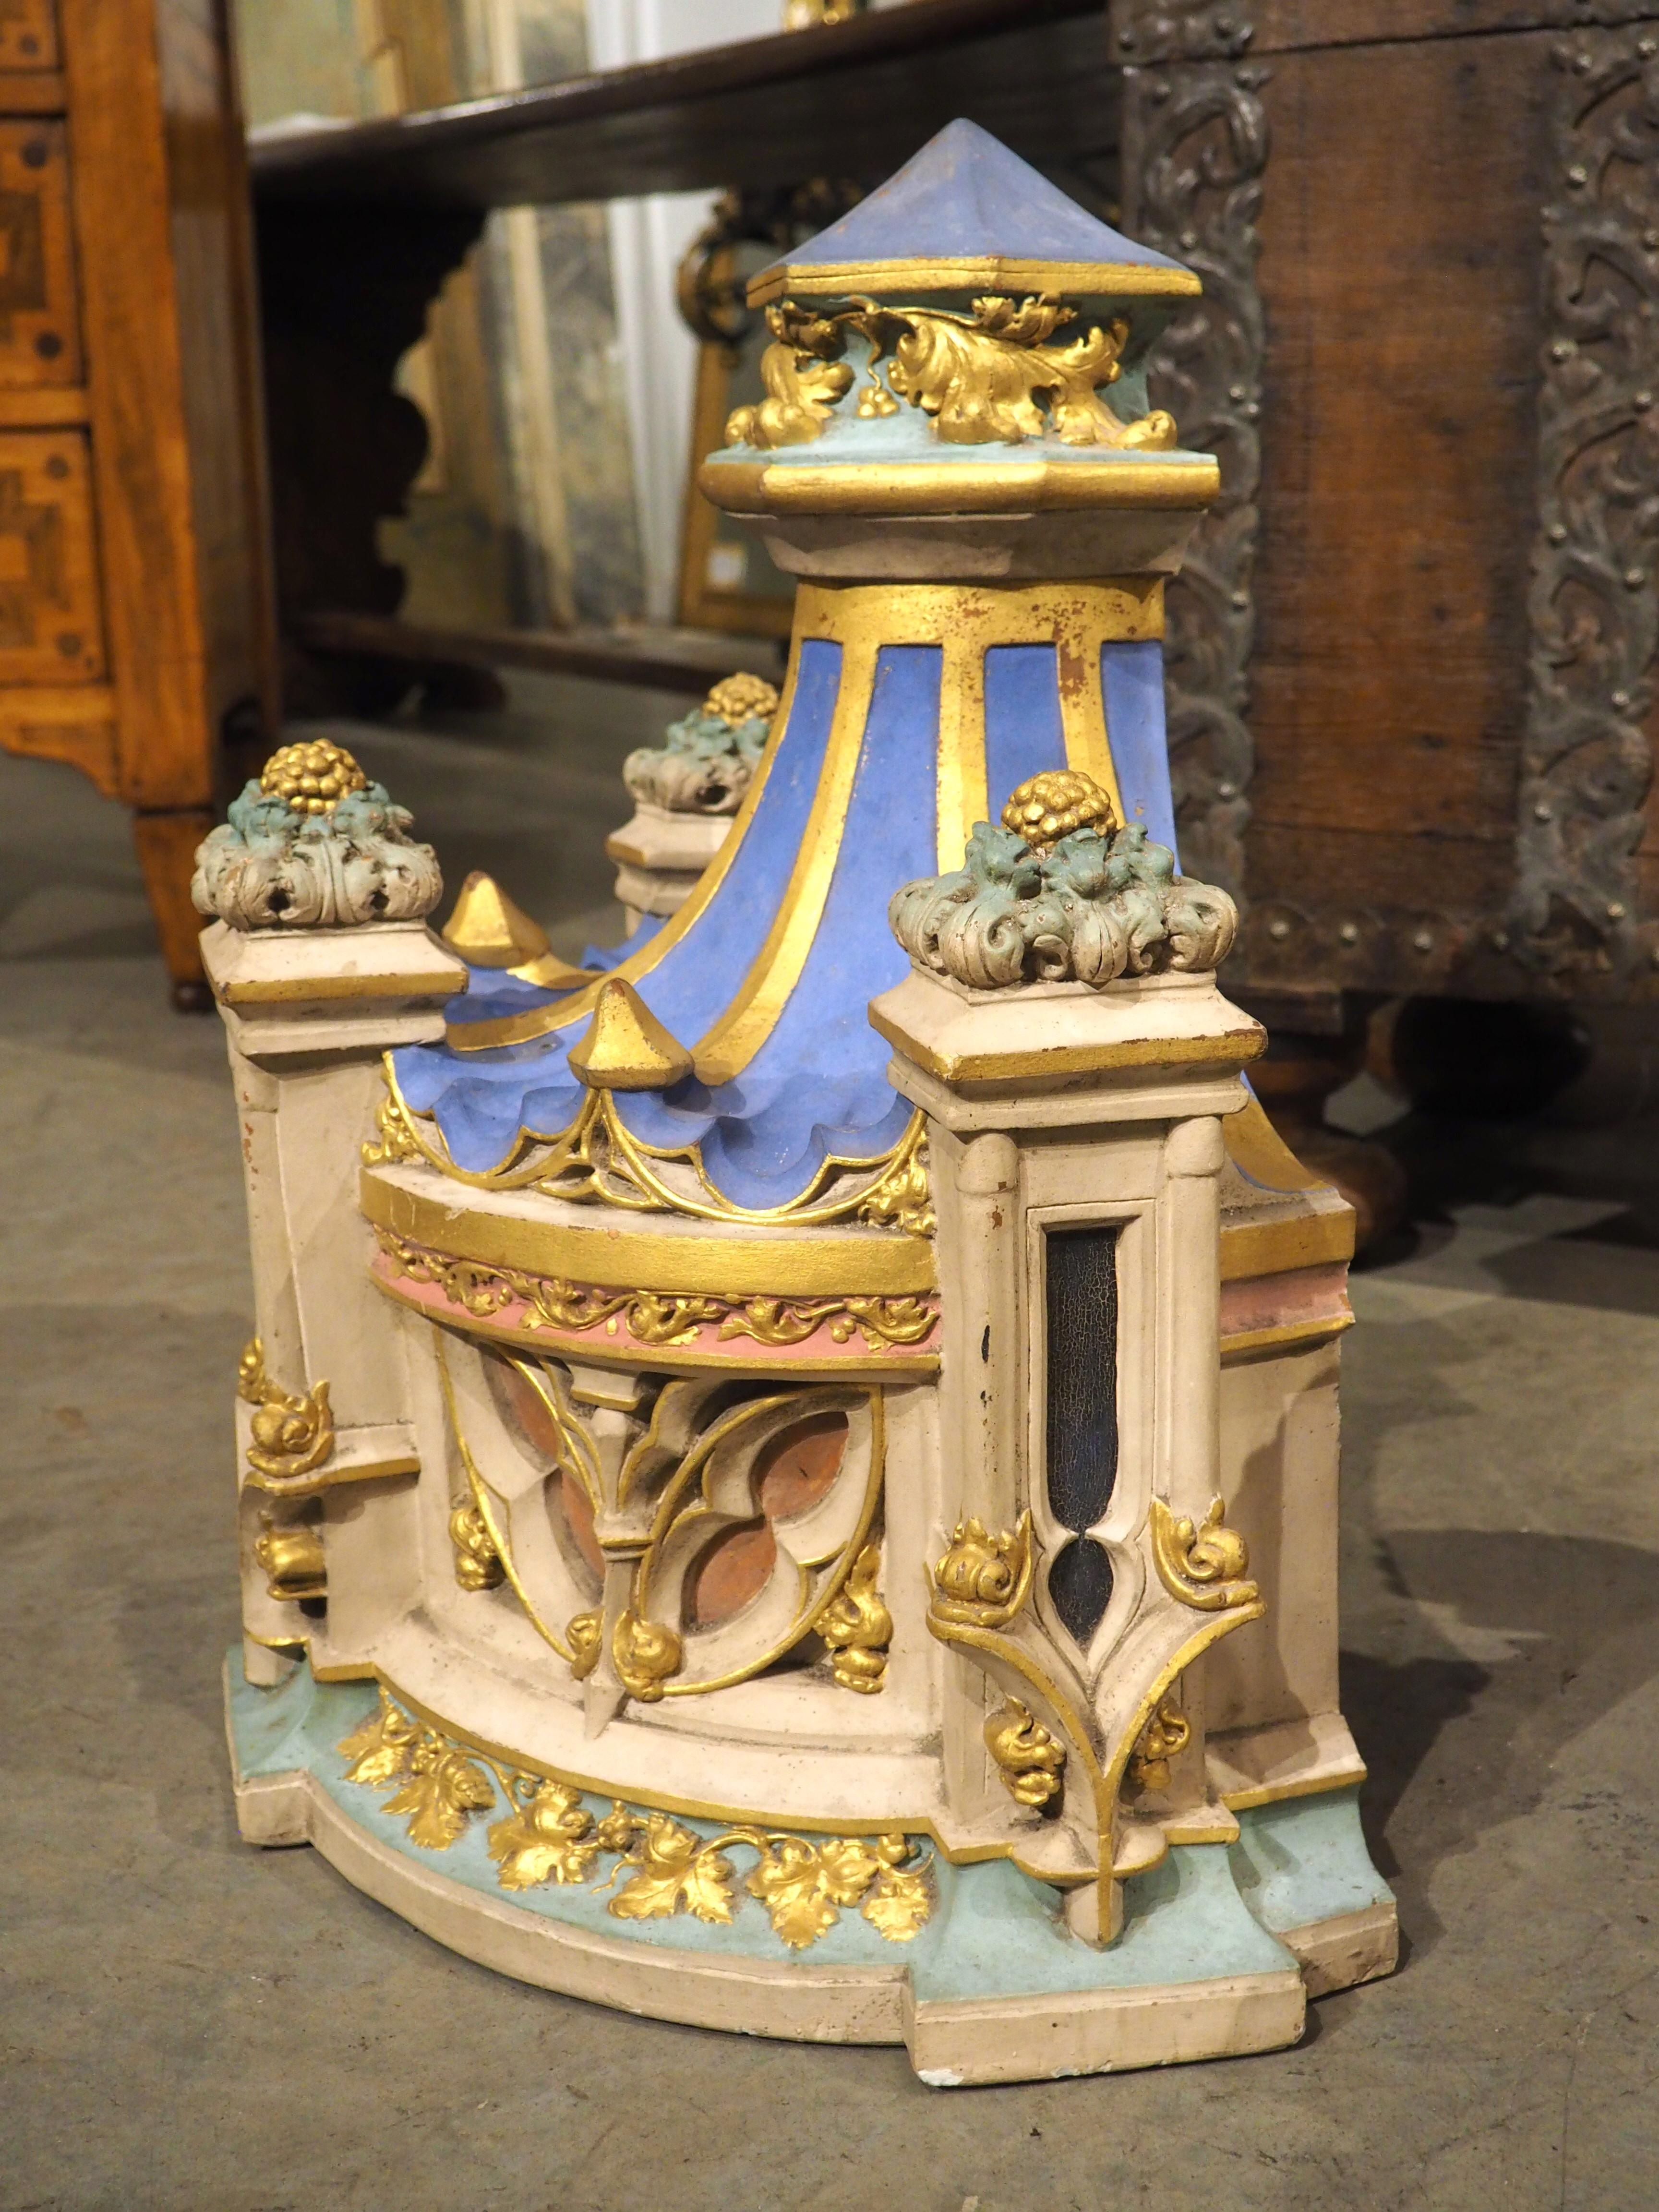 Pair of Polychrome Terra Cotta Architecturals or Wall Consoles, France, C. 1850 For Sale 7